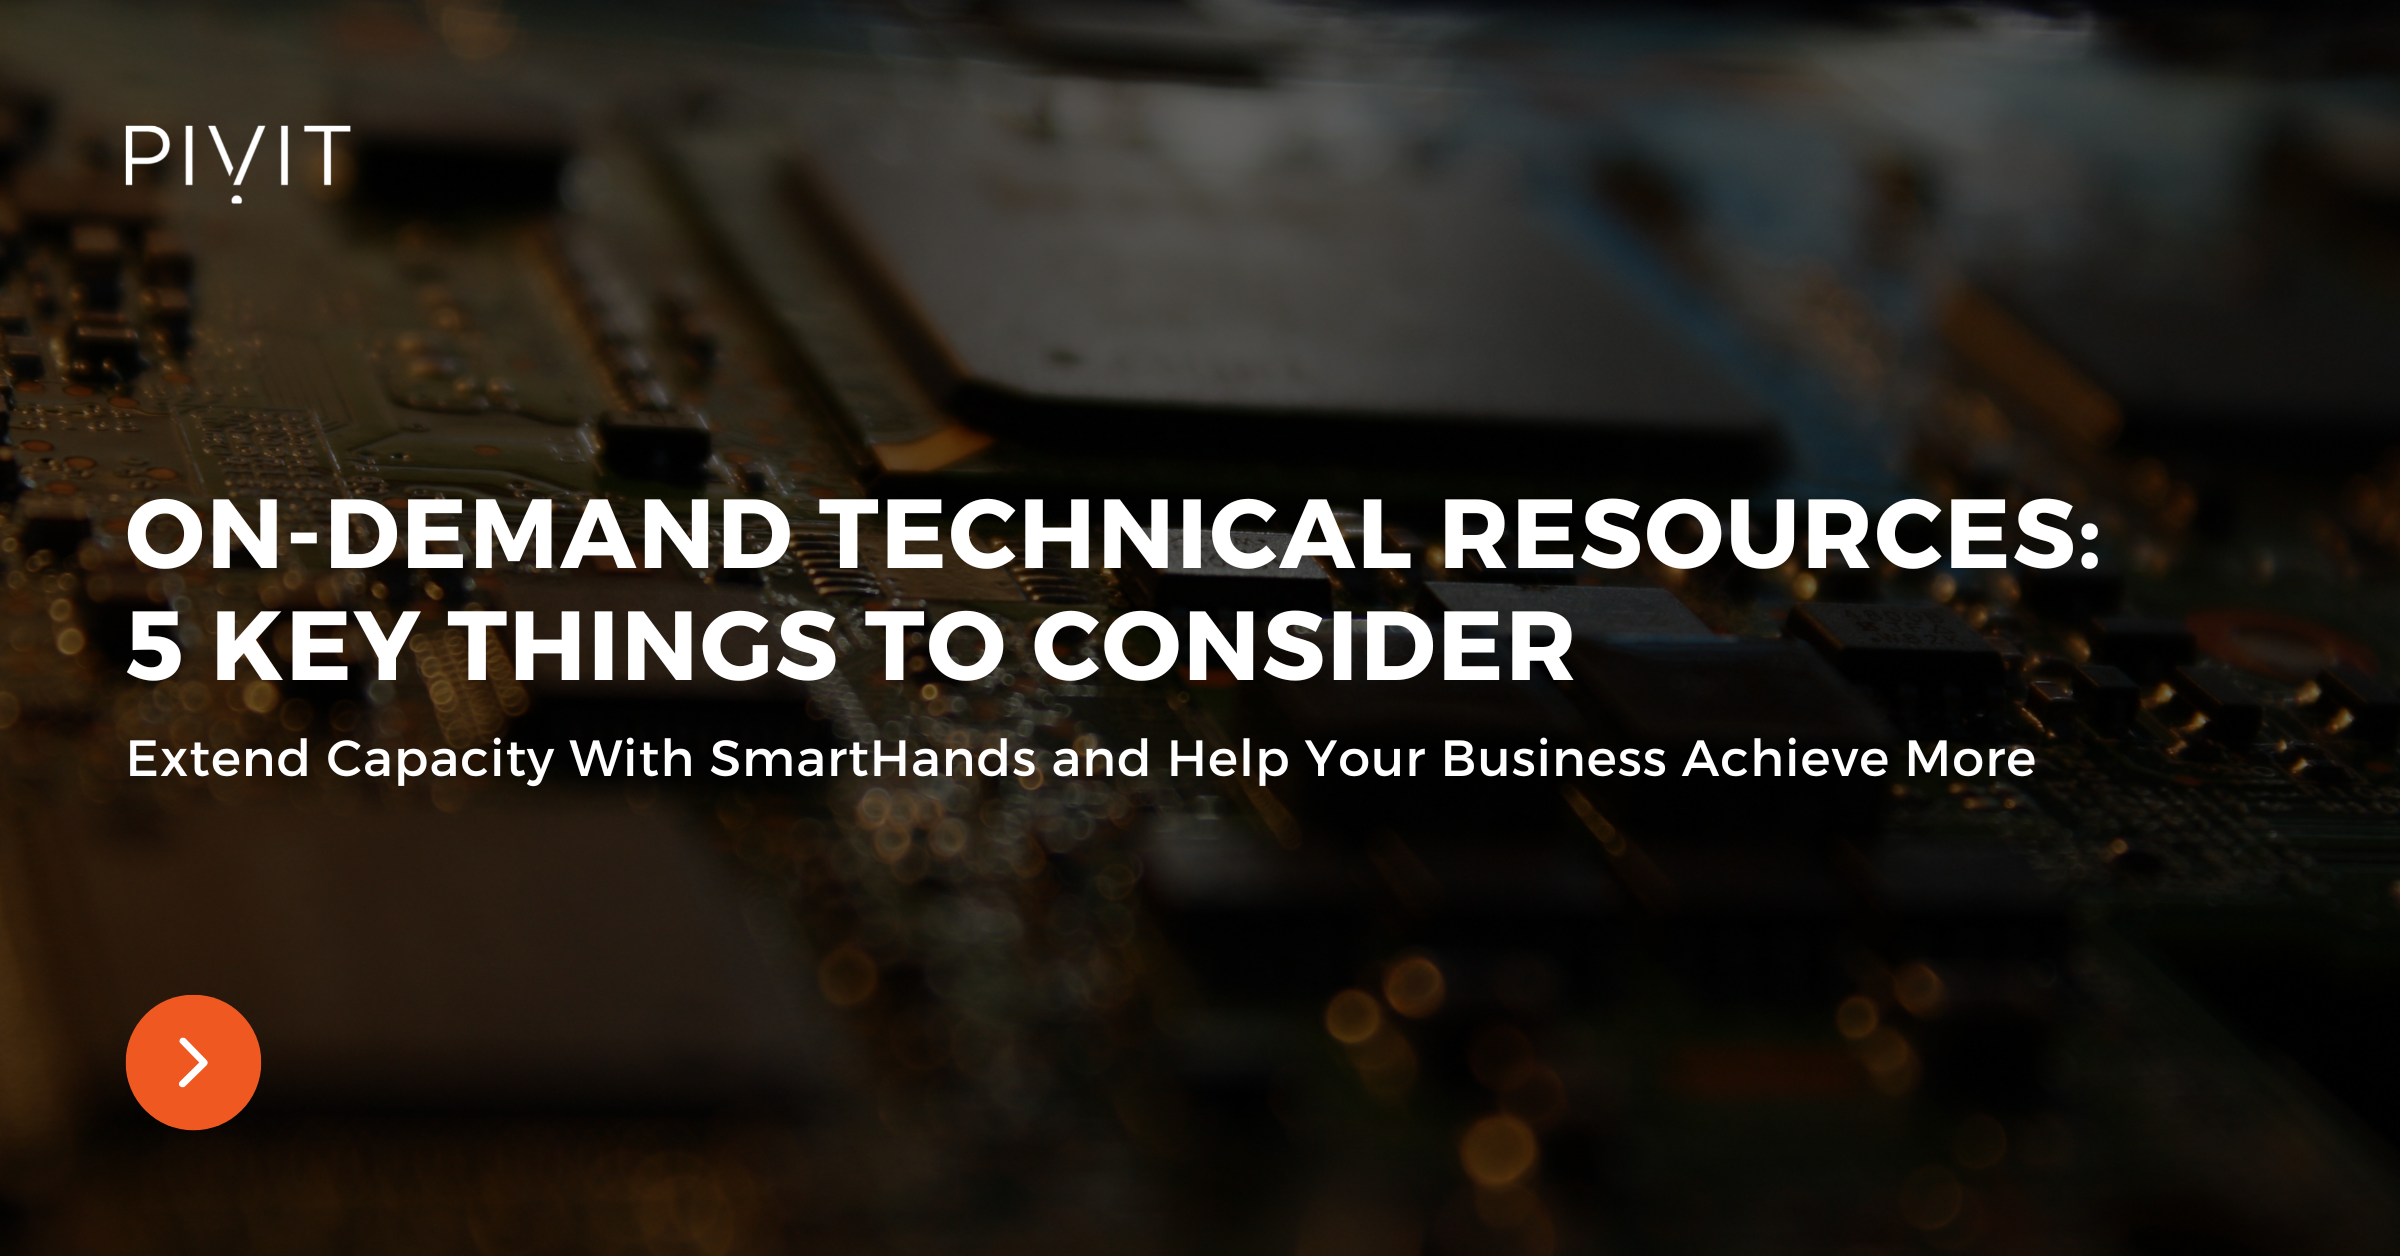 On-Demand Technical Resources: 5 Key Things to Consider